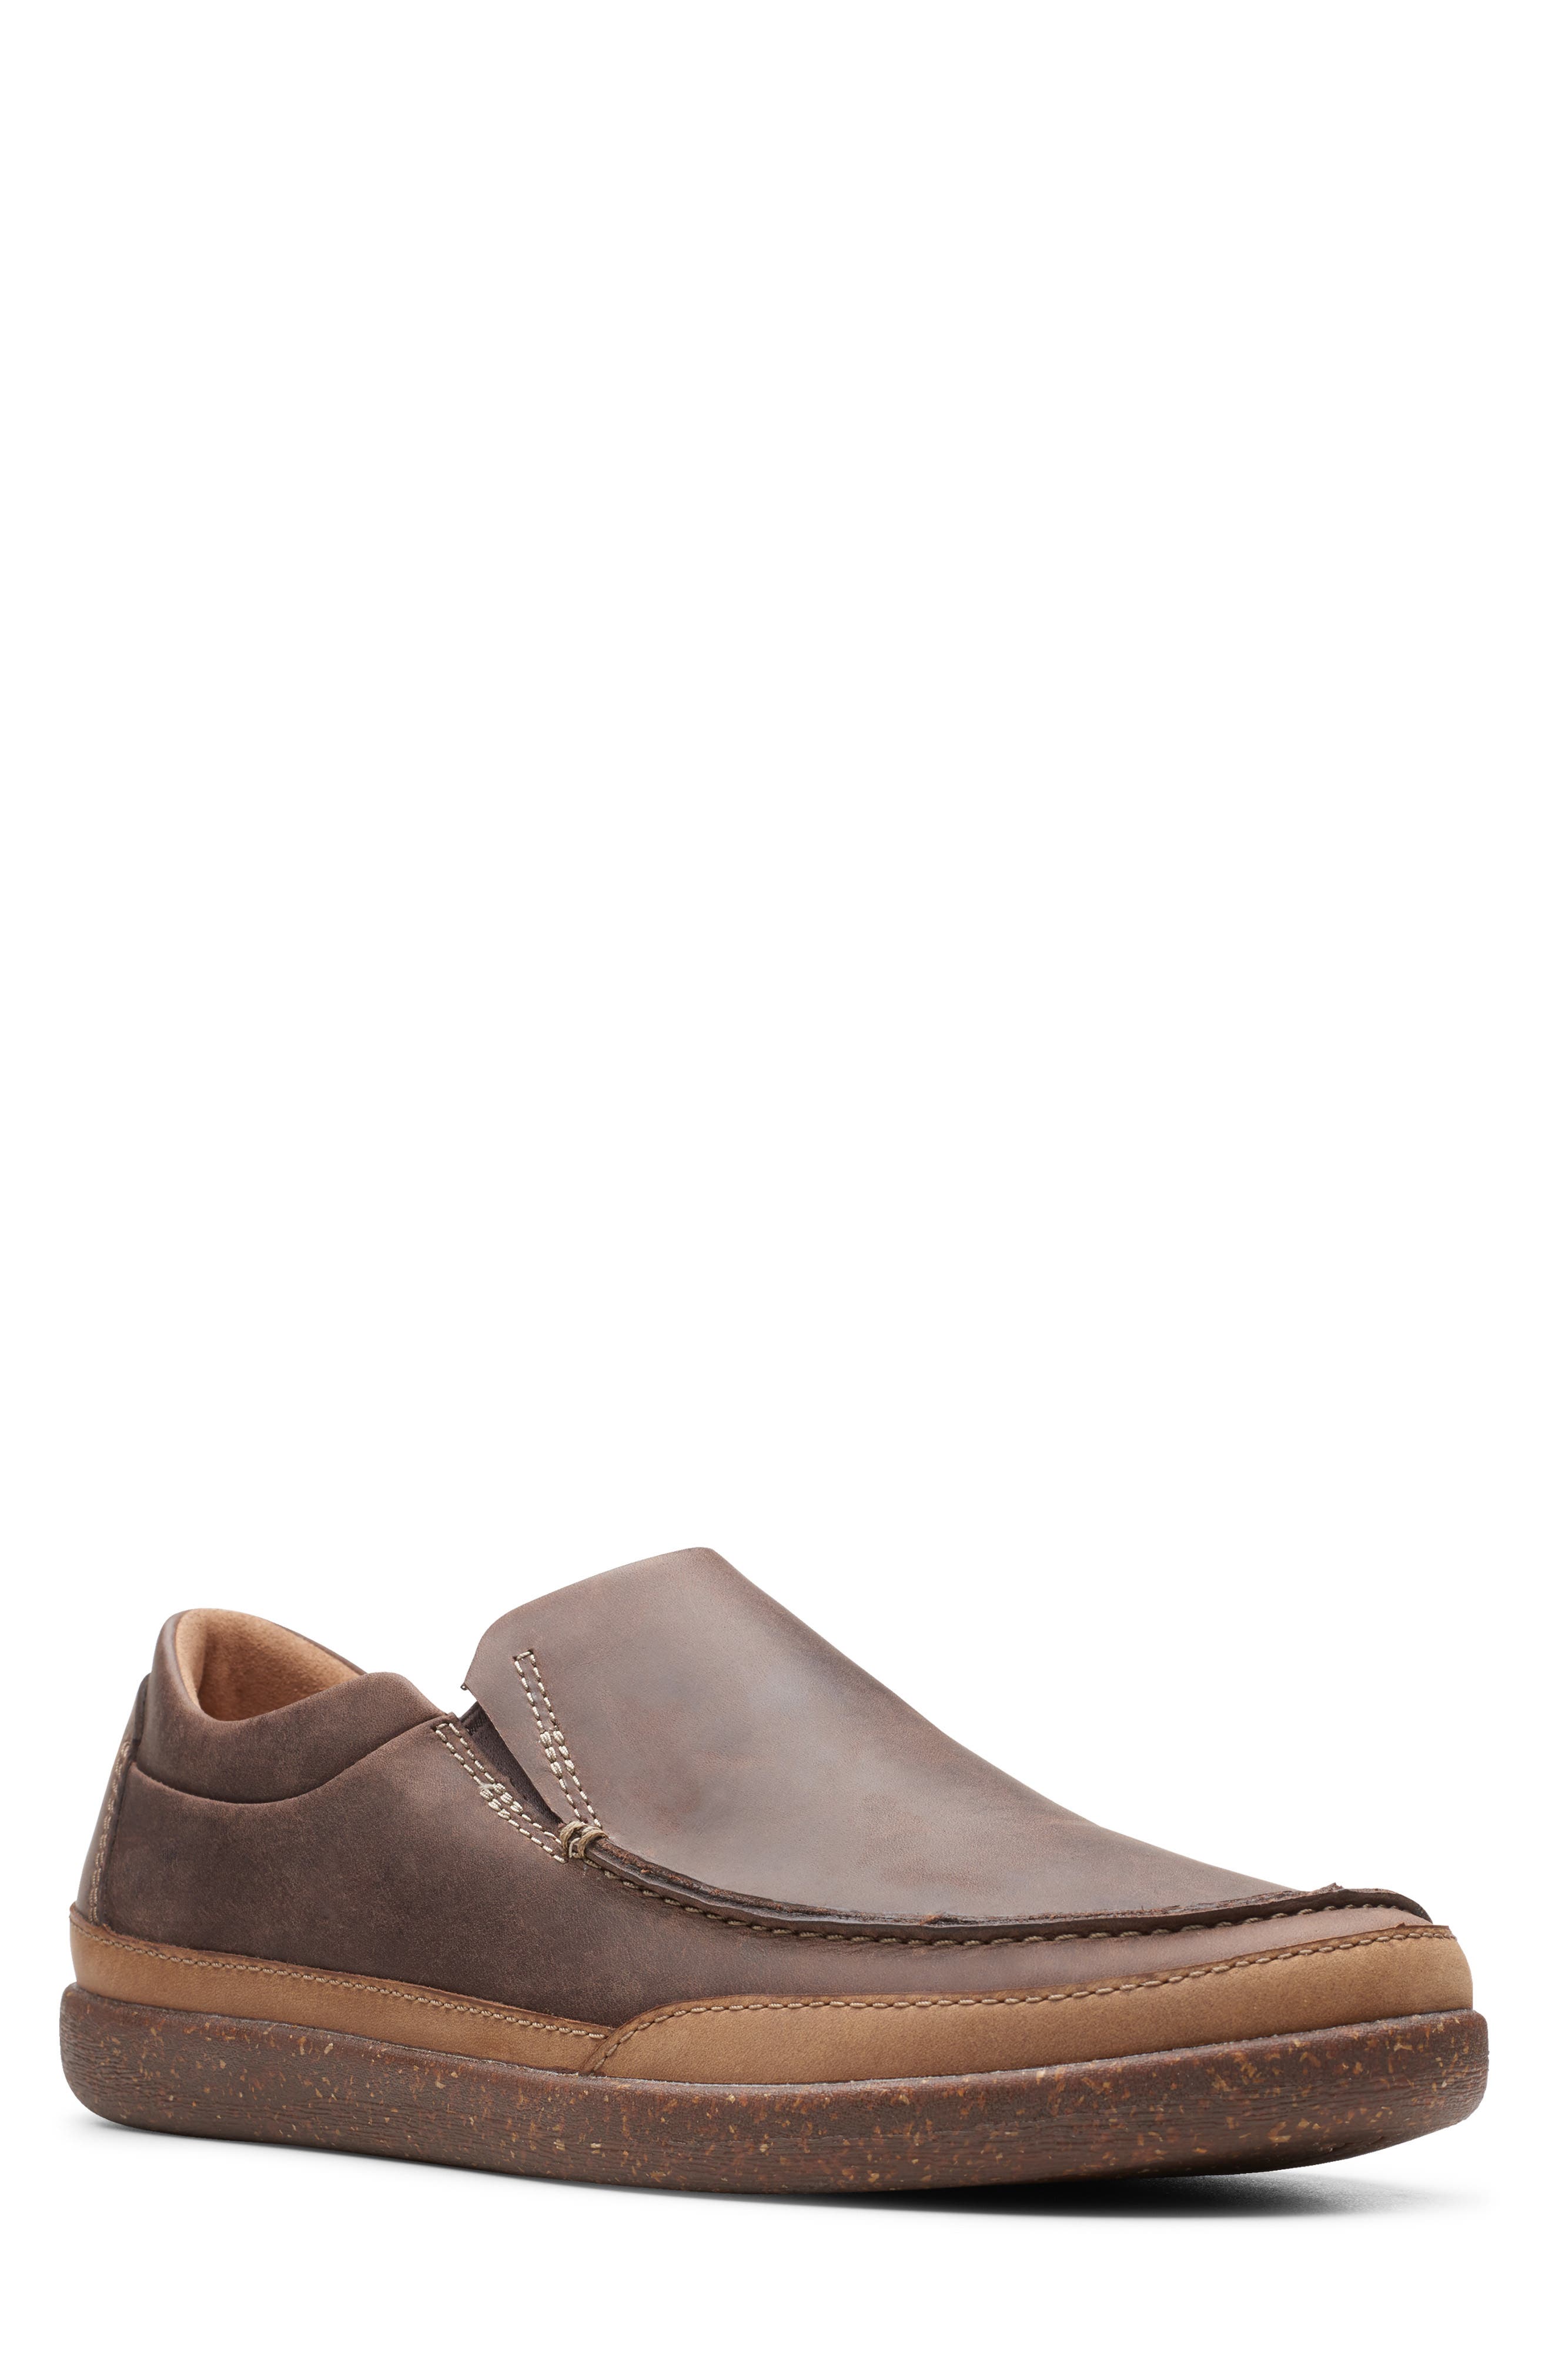 mens clarks work shoes